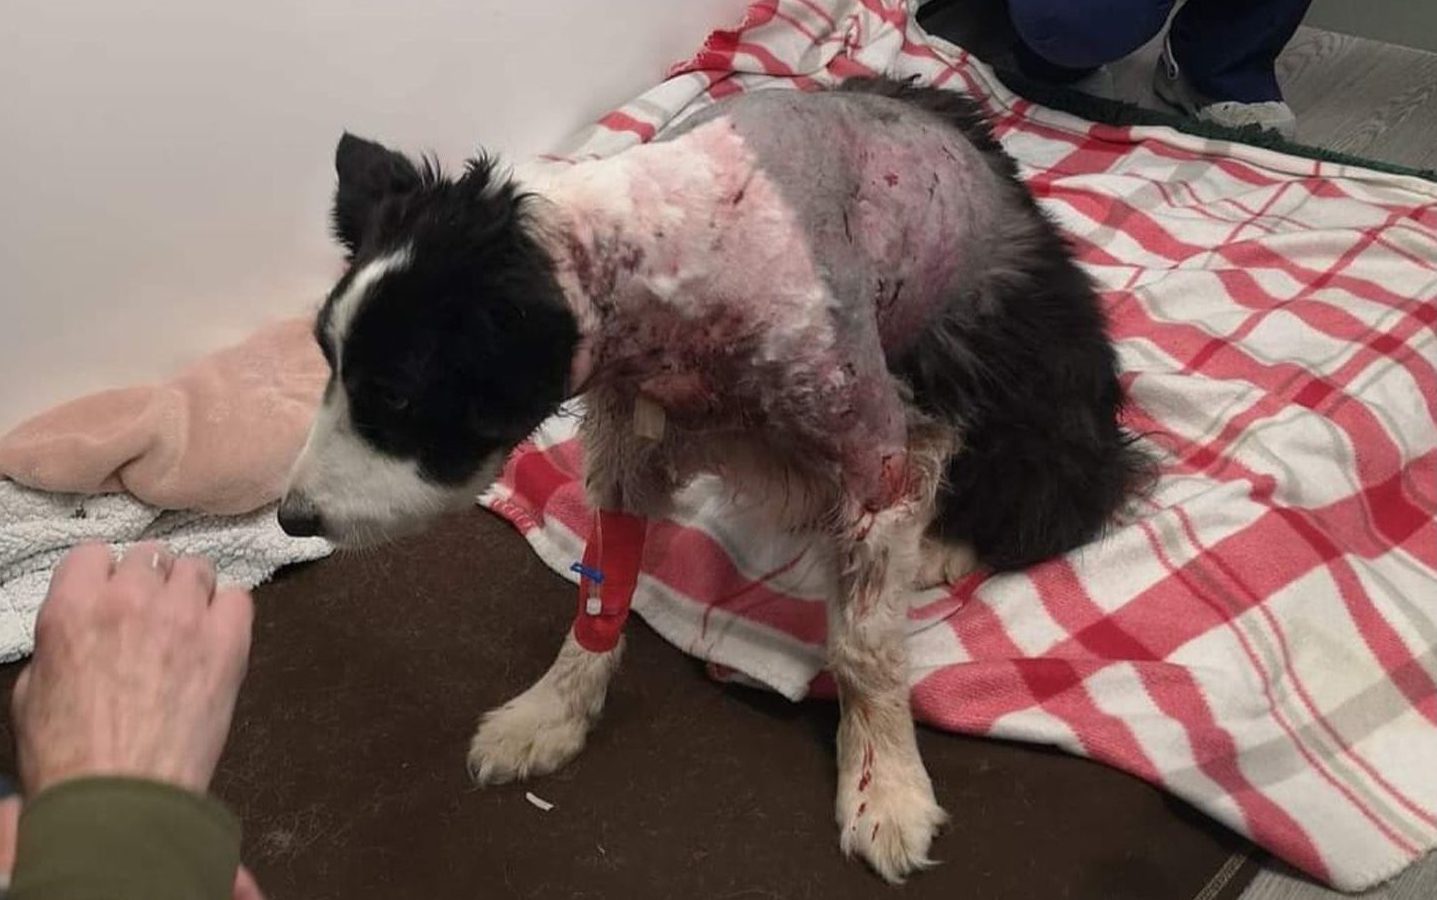 Missy, who died of her injuries following the Fife dog attack, is pictured with shaved fur and visible wounds